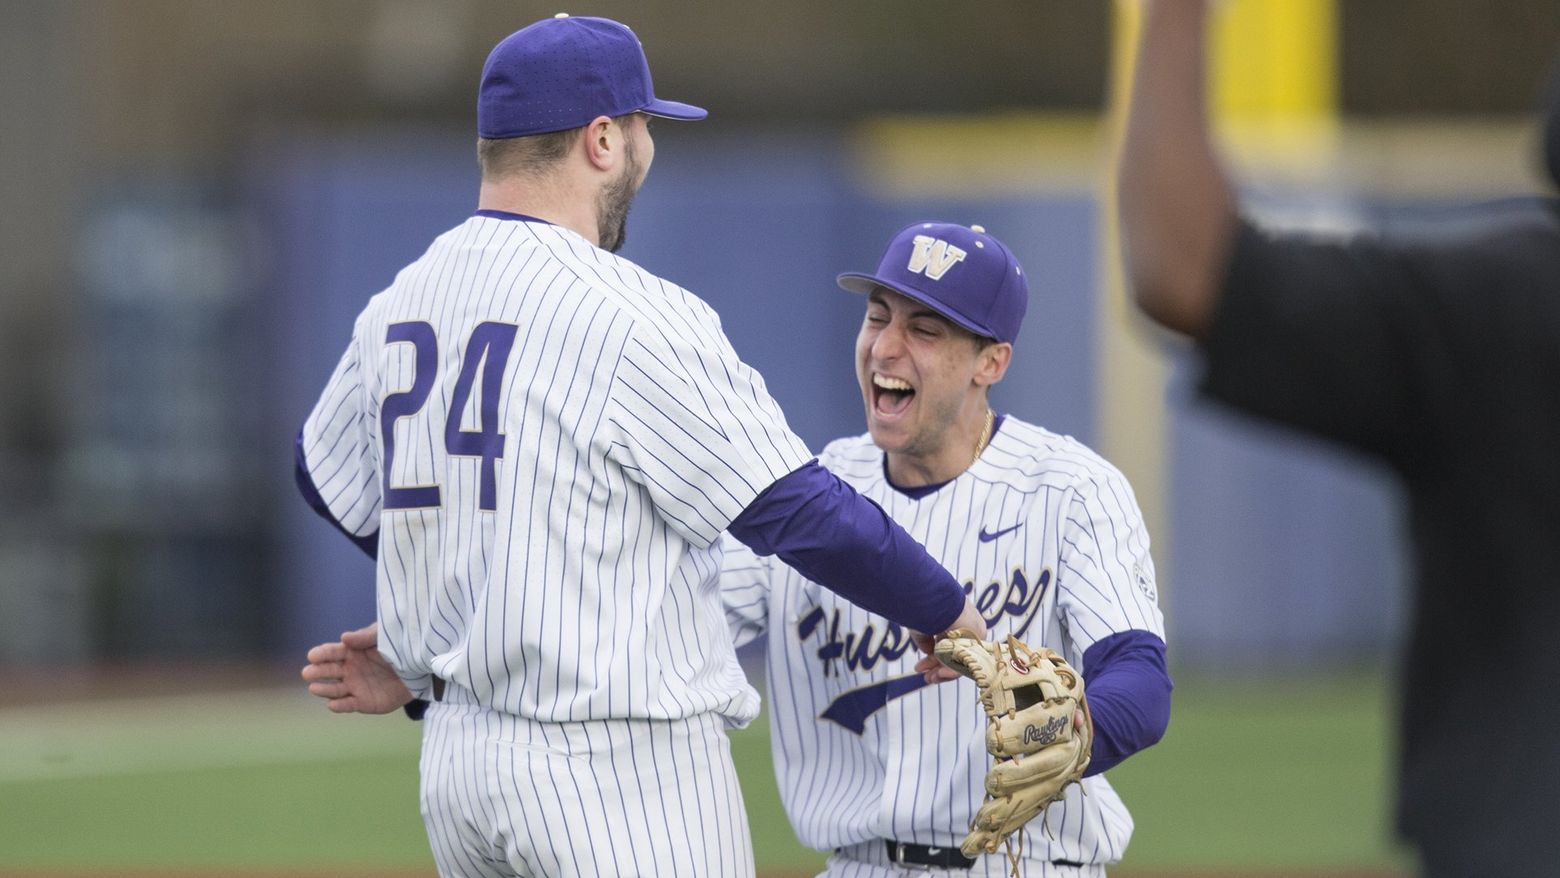 We're hot and we're feeling good': UW baseball two wins away from